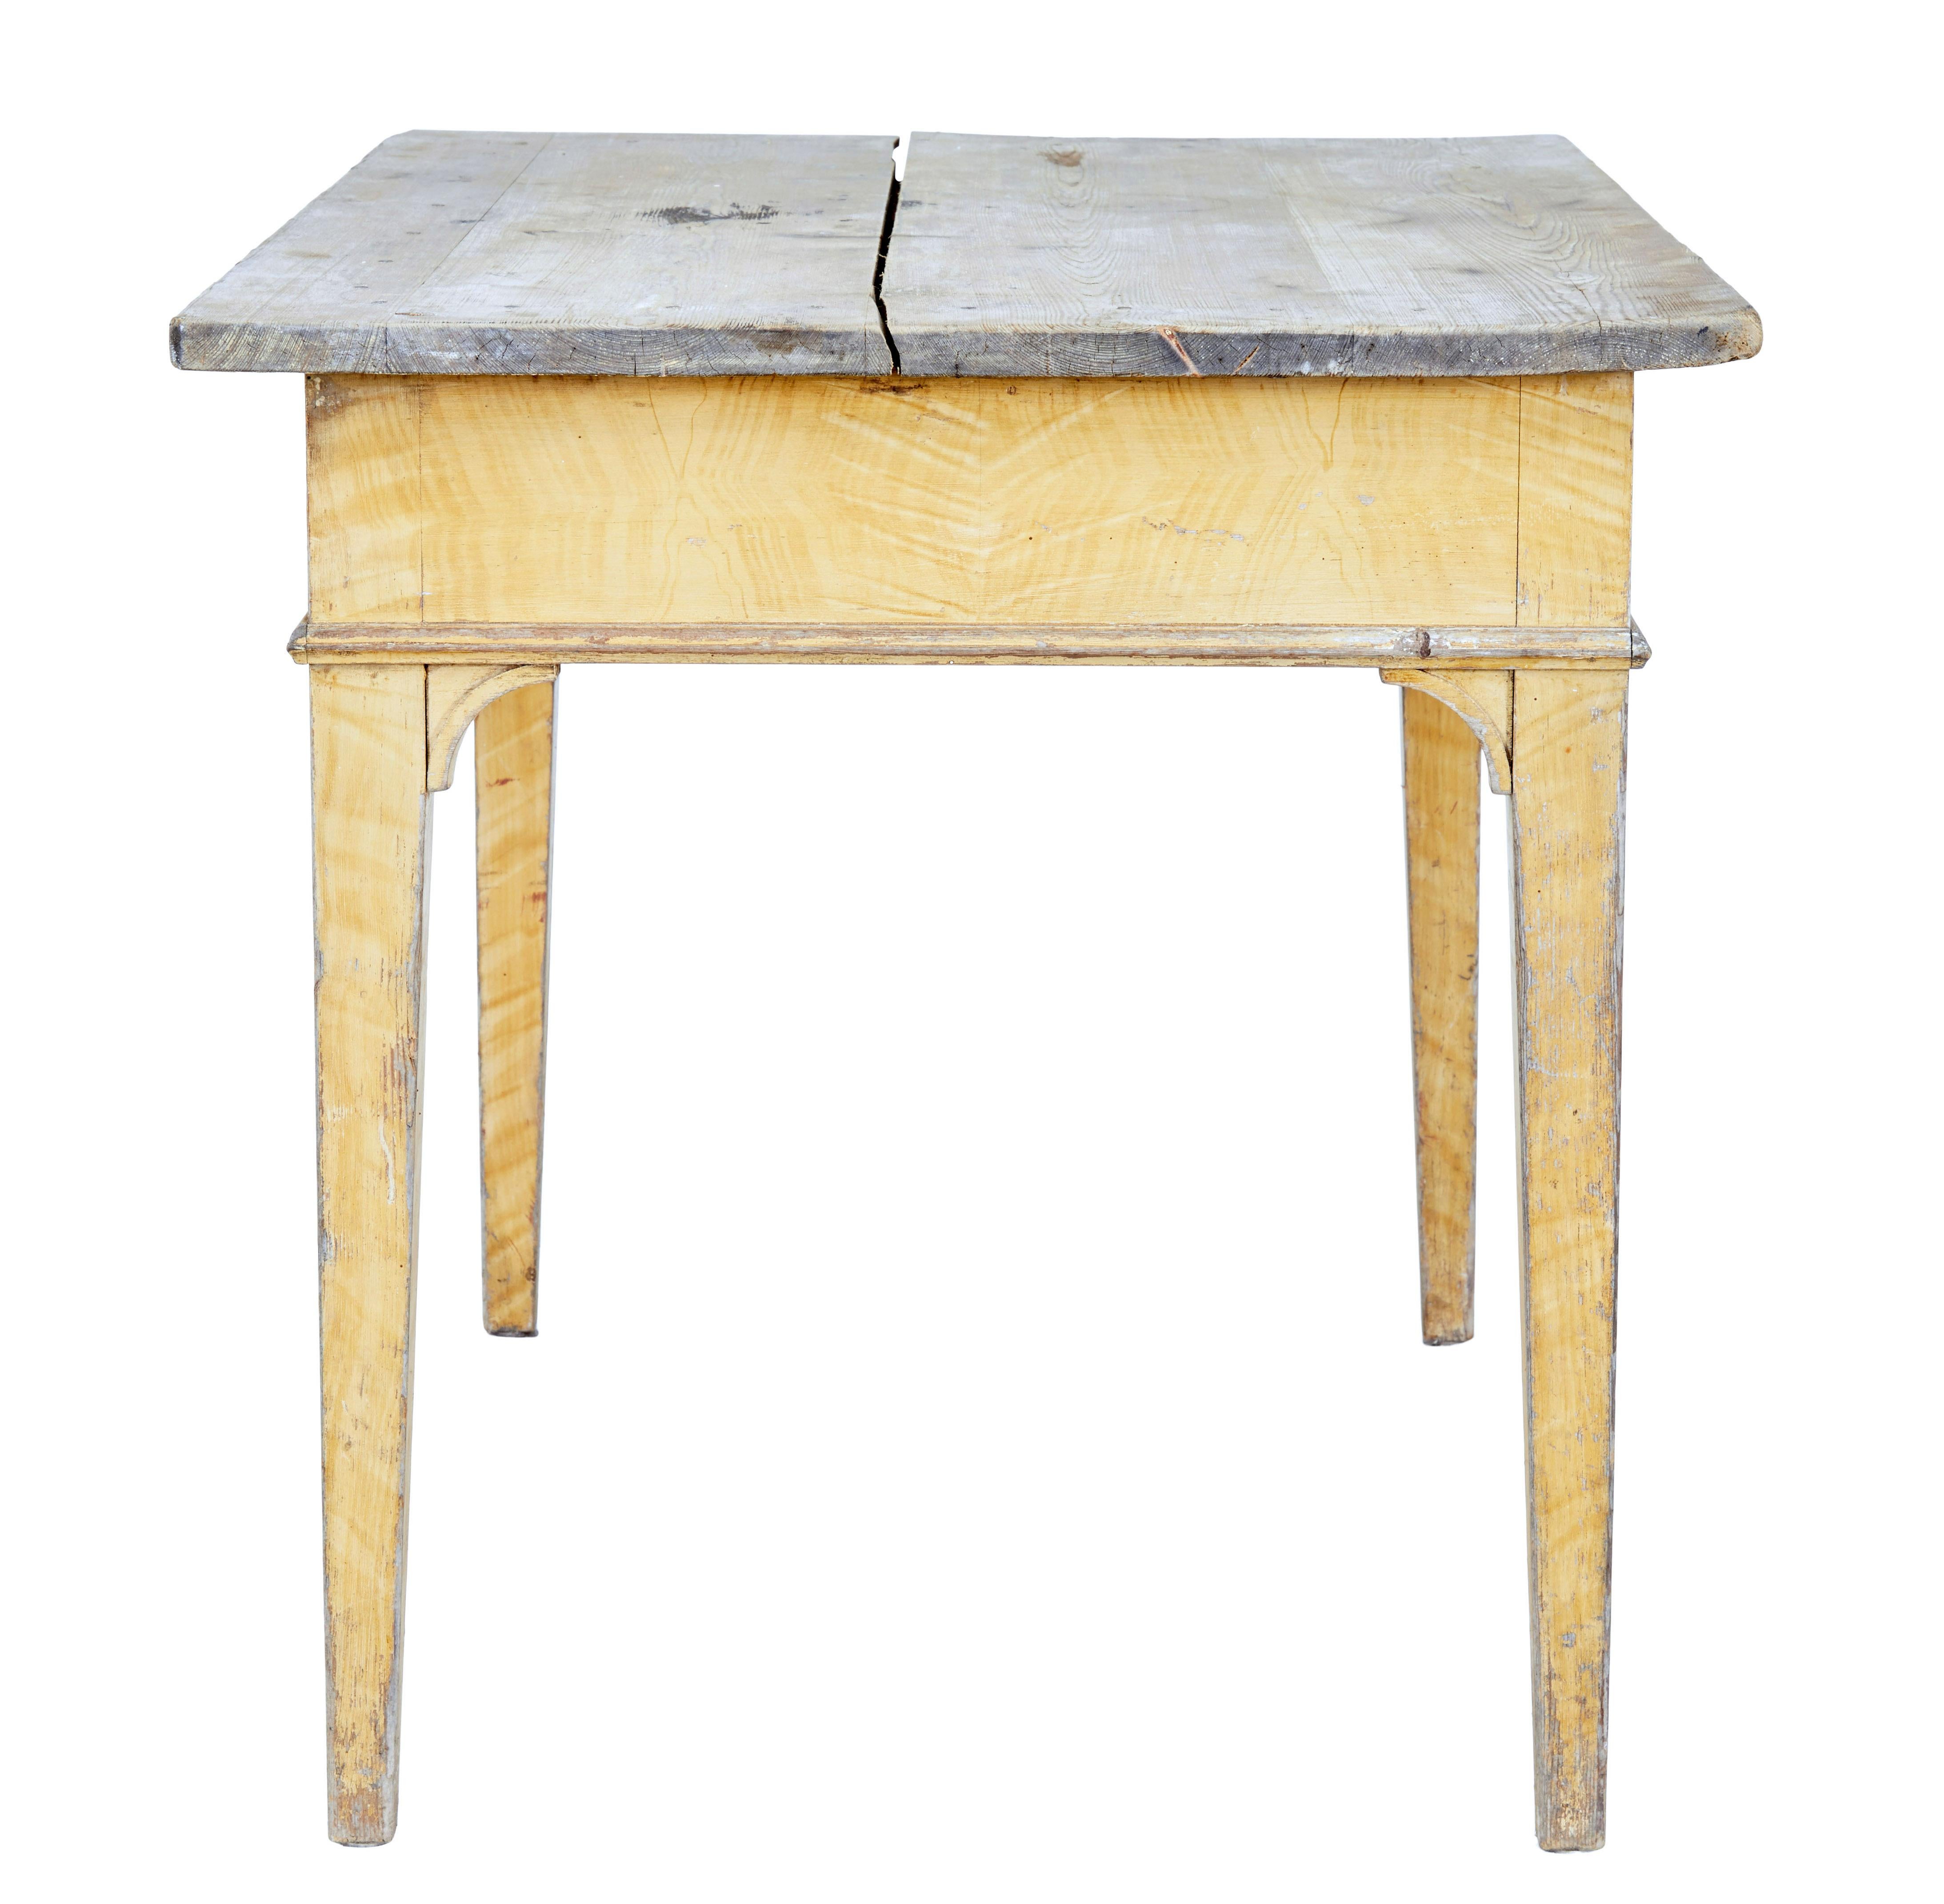 Swedish 19th Century Painted Pine Kitchen Table For Sale 3